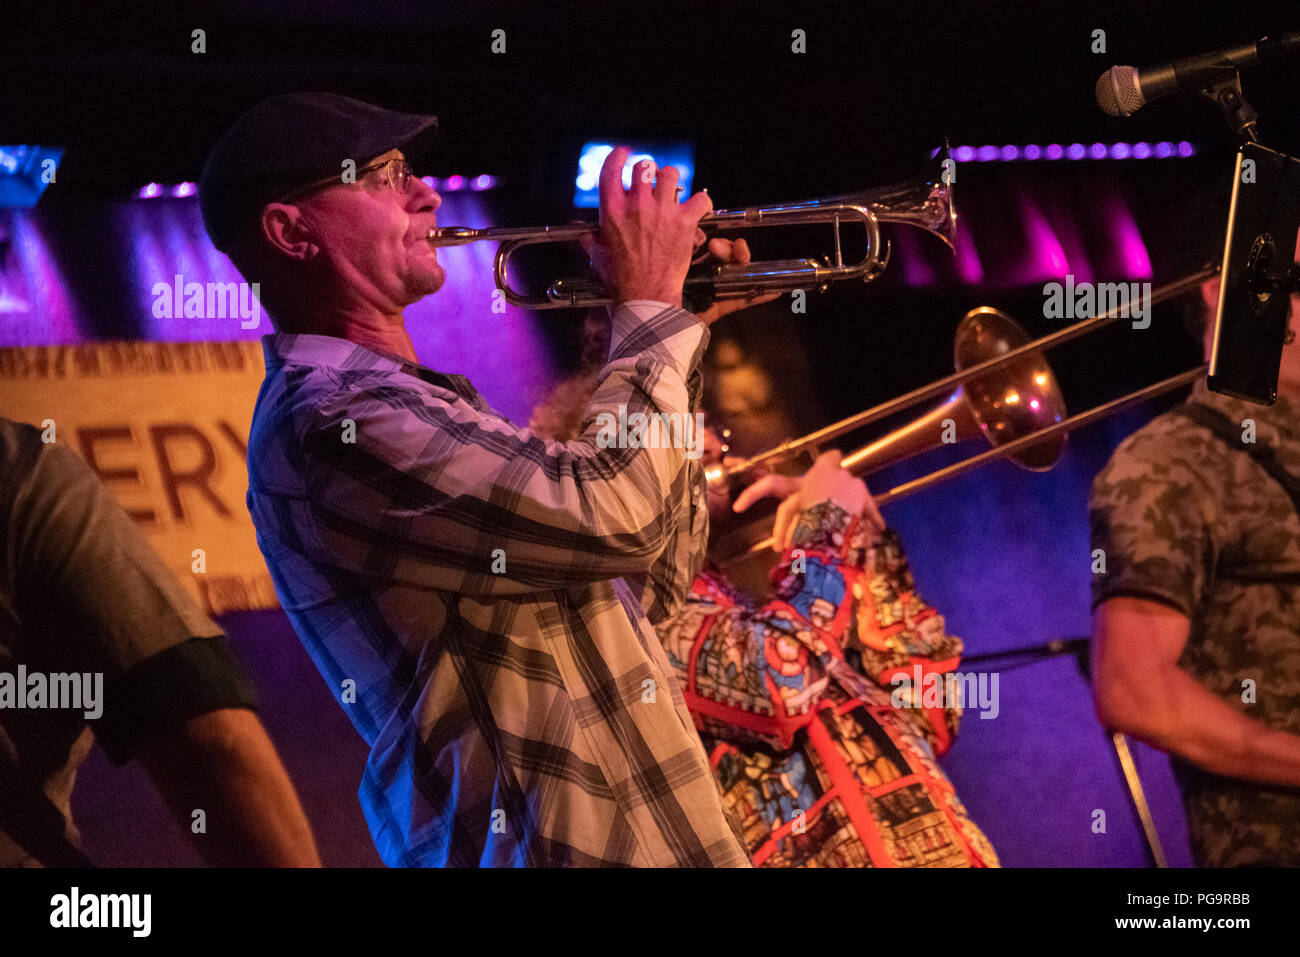 Brass musicians Karl Liberatore (trumpet) and Freedman Steorts (trombone) join Smalltown Poets for a couple songs during a concert at City Winery ATL. Stock Photo